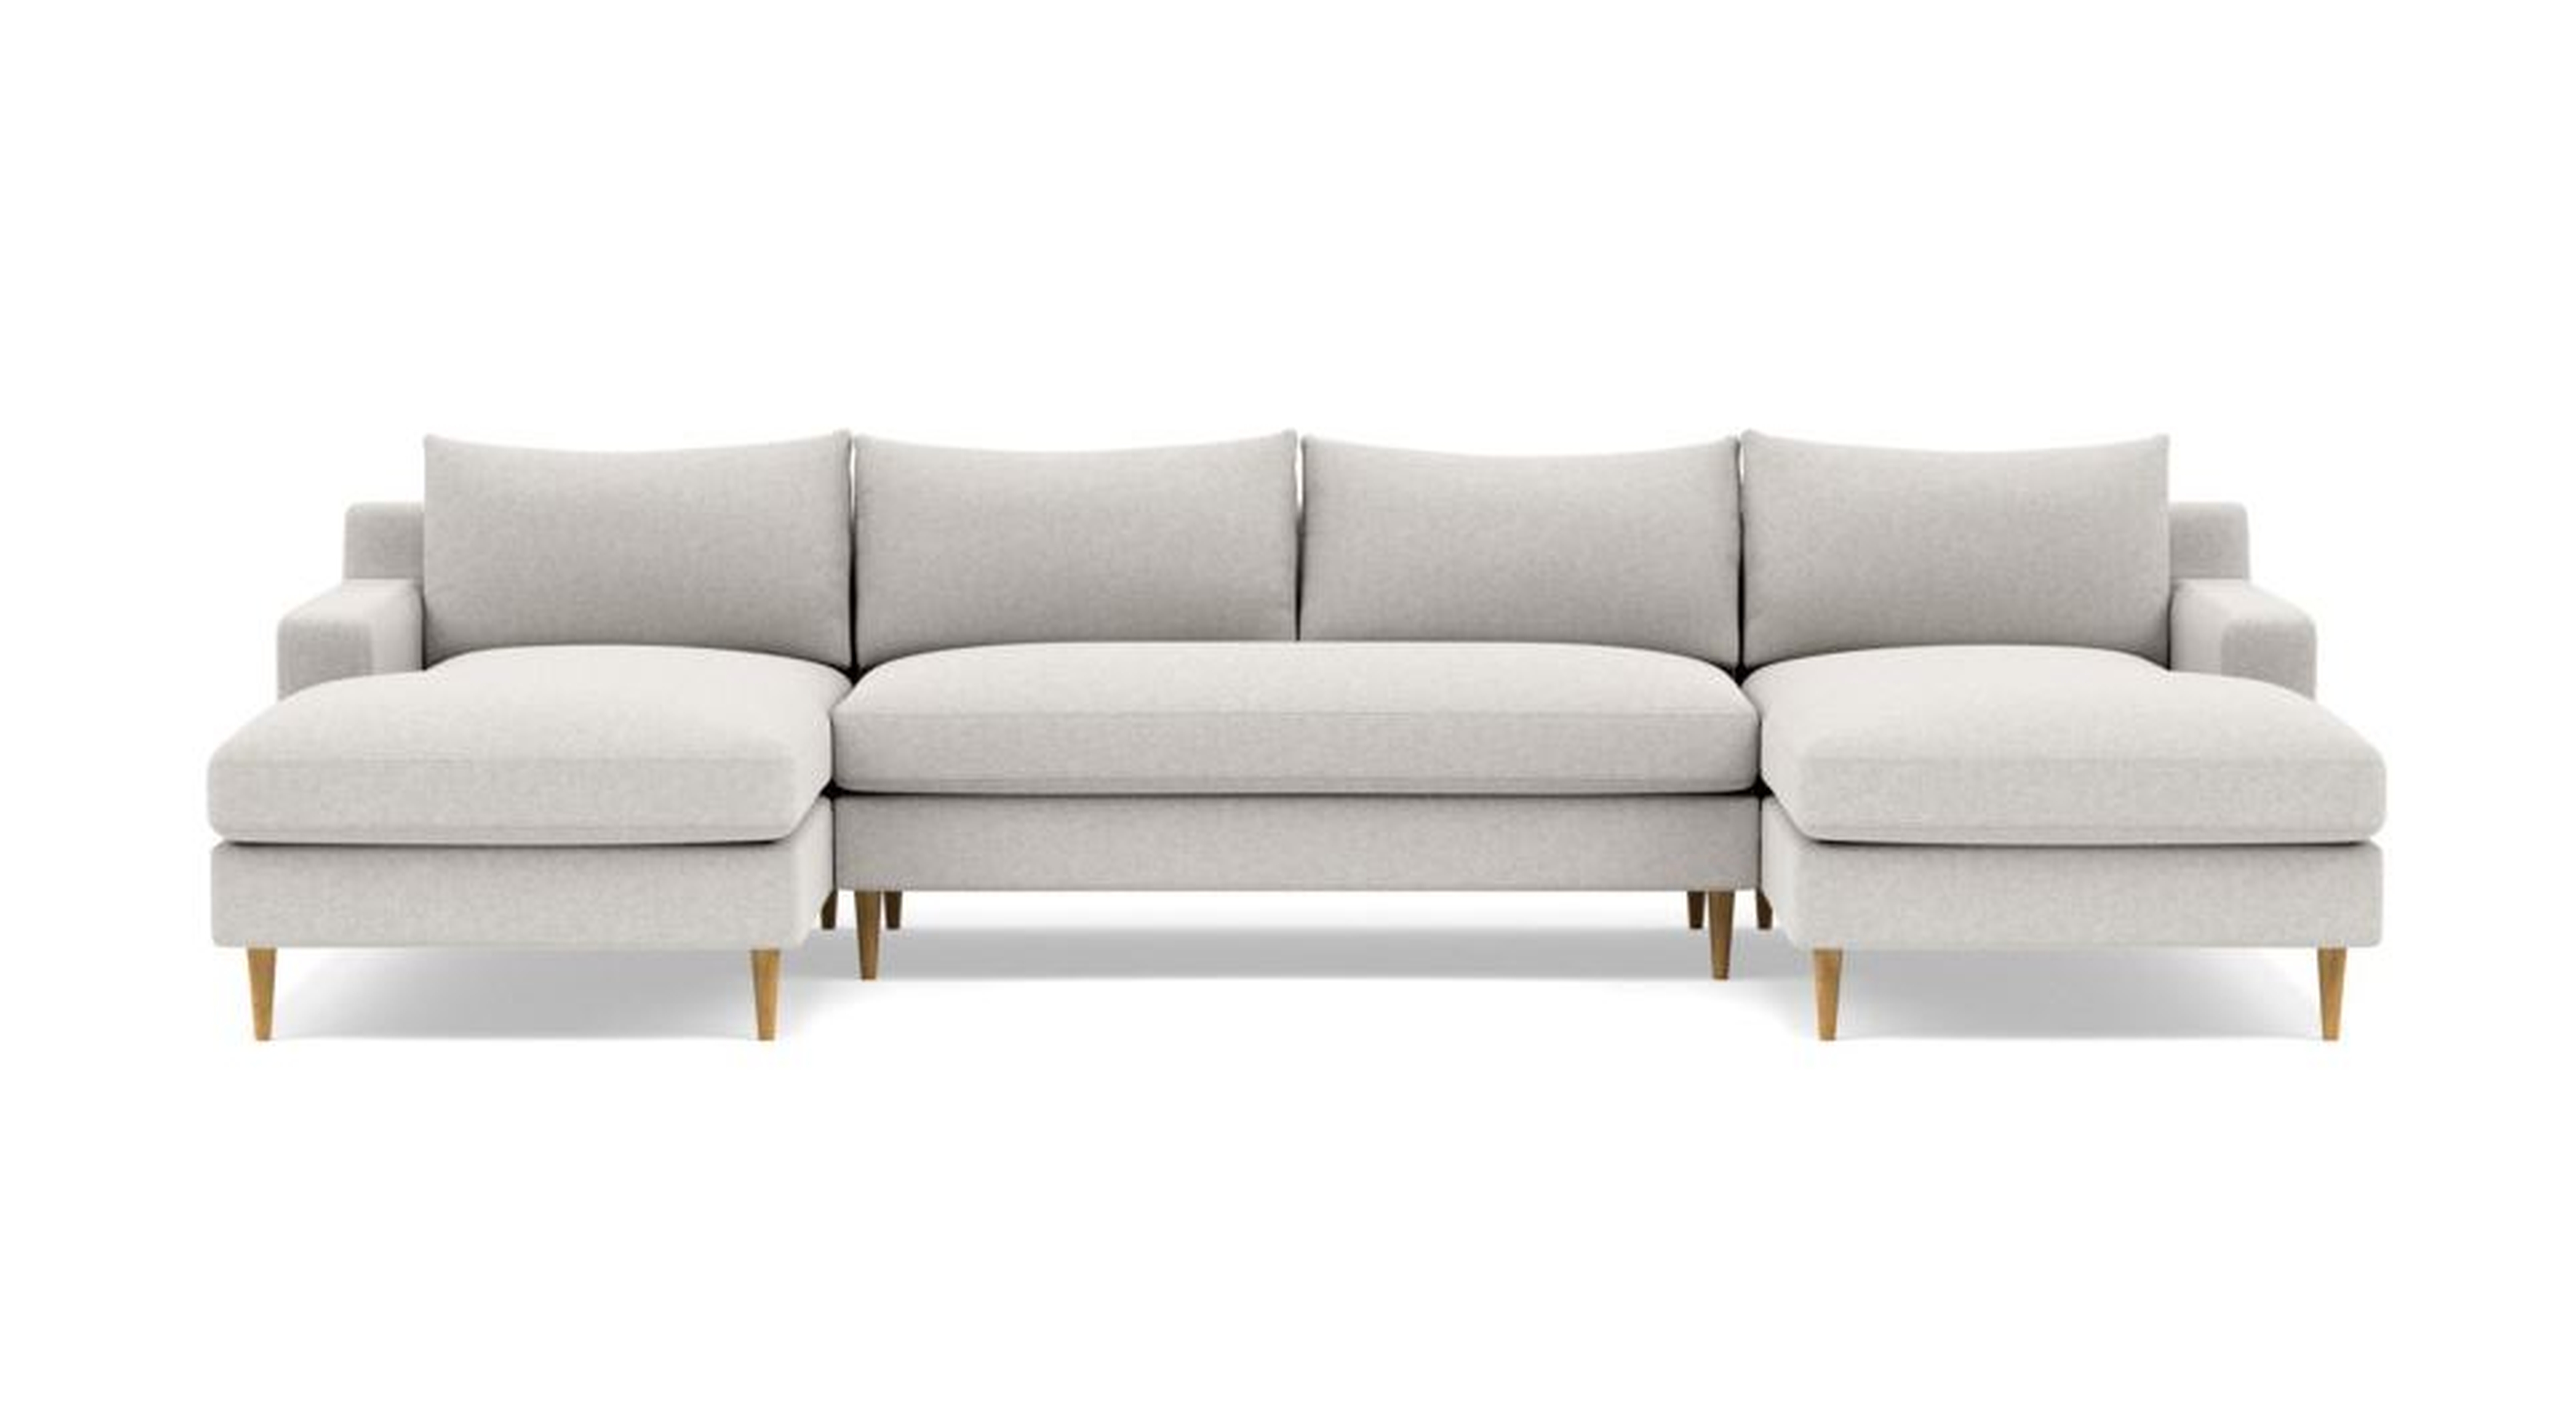 Sloan Custom U-Sectional Sofa 125" Pebble with Natural Oak Tapered Roung Legs - Interior Define